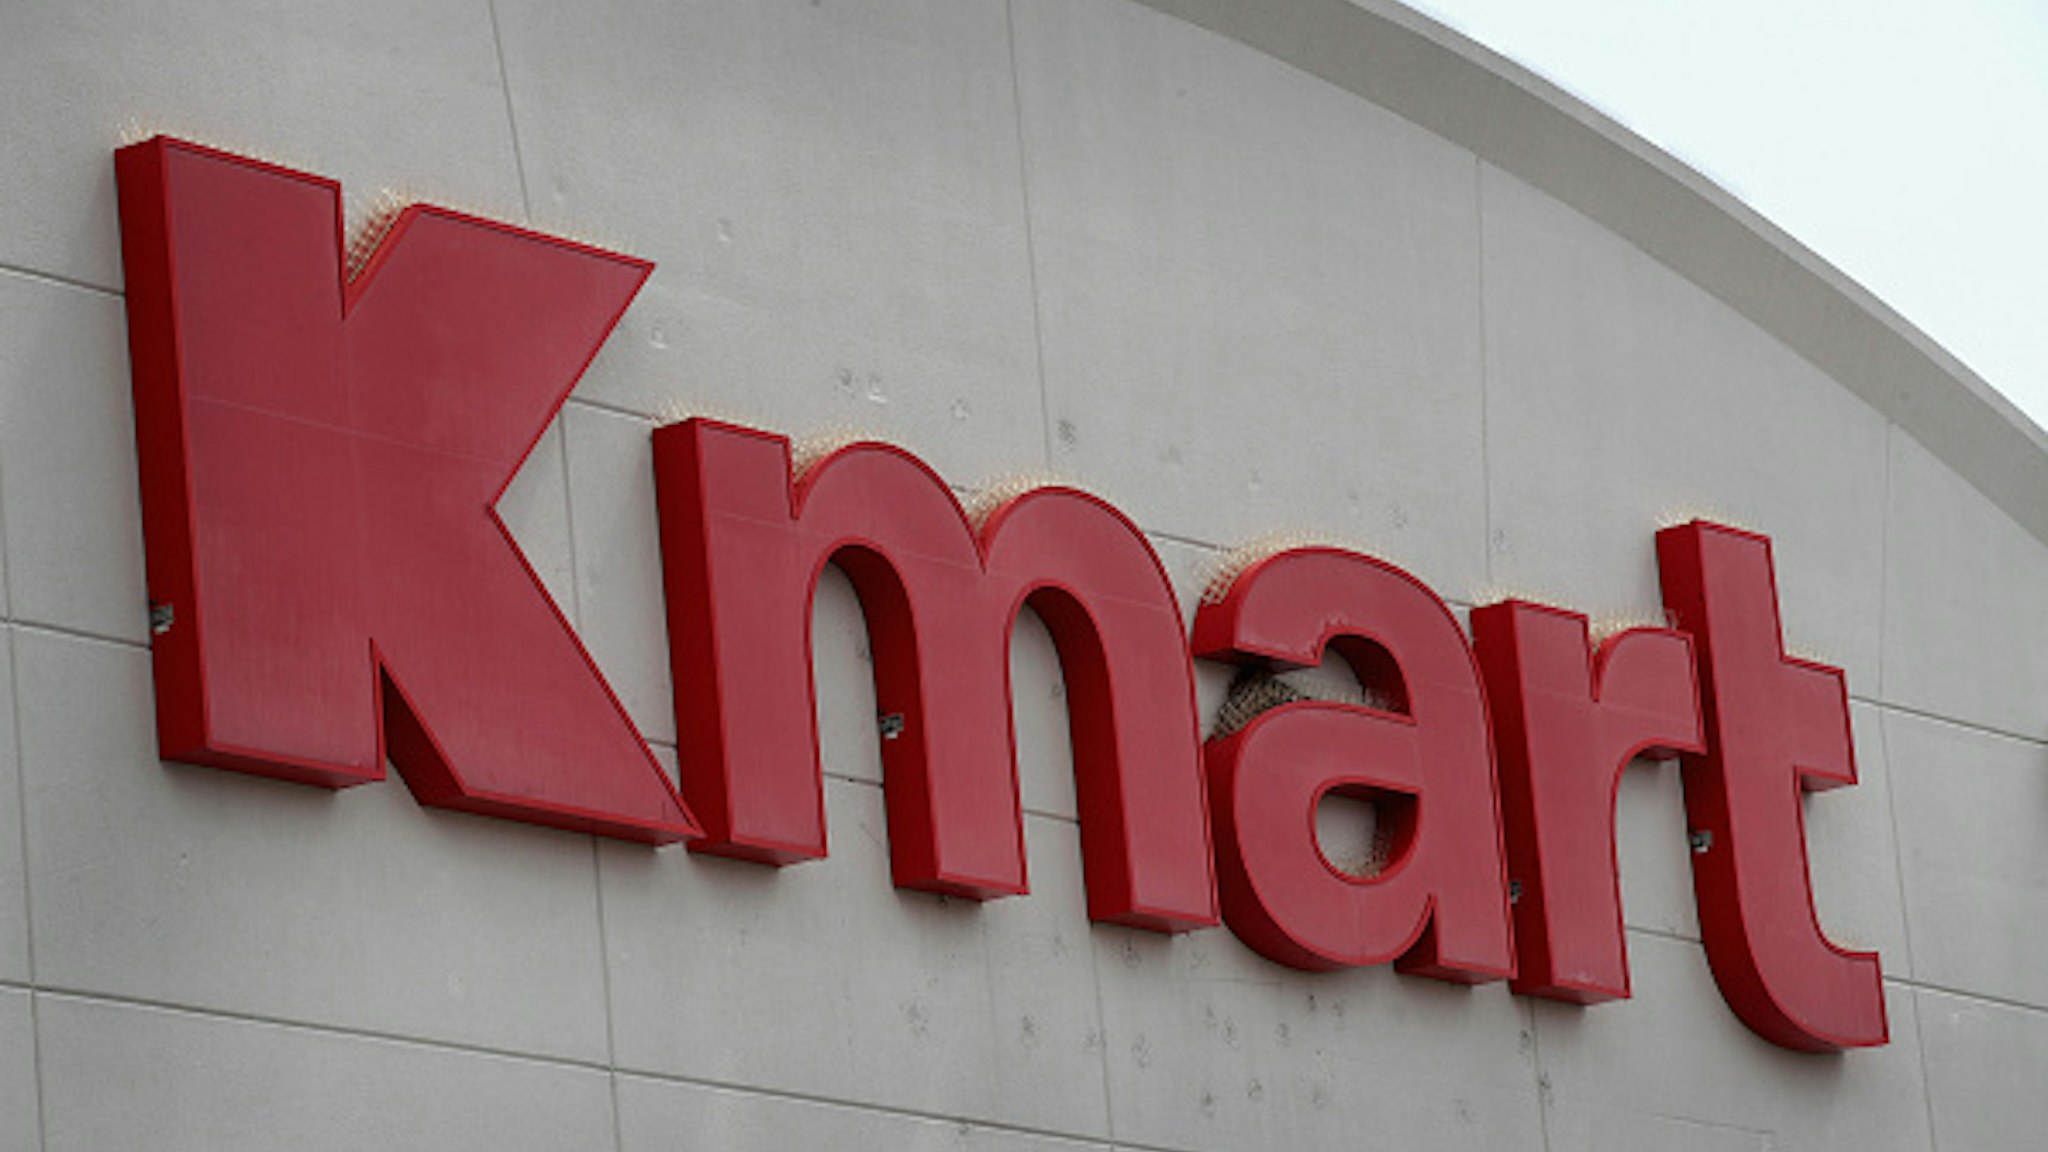 ELMHURST, IL - AUGUST 24: A sign hangs above a Kmart store on August 24, 2017 in Elmhurst, Illinois. Sears Holdings Corporation, the owner of Kmart, said today it was planning on closing another 28 Kmart store including this Elmhurst location.